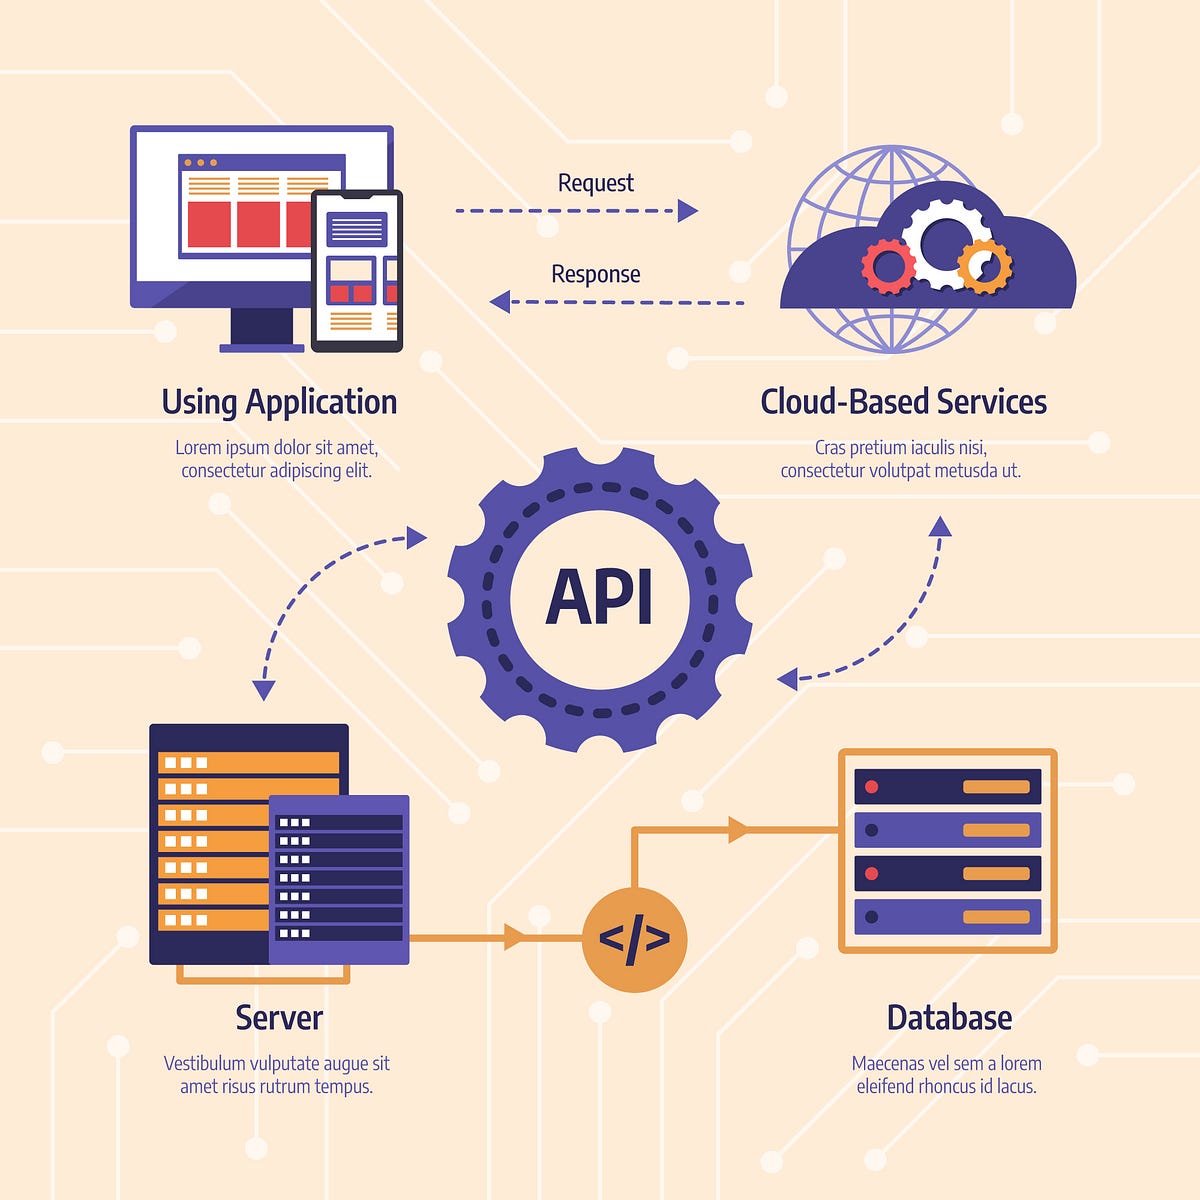 apis-the-software-middlemen-apis-are-the-cornerstone-of-modern-by